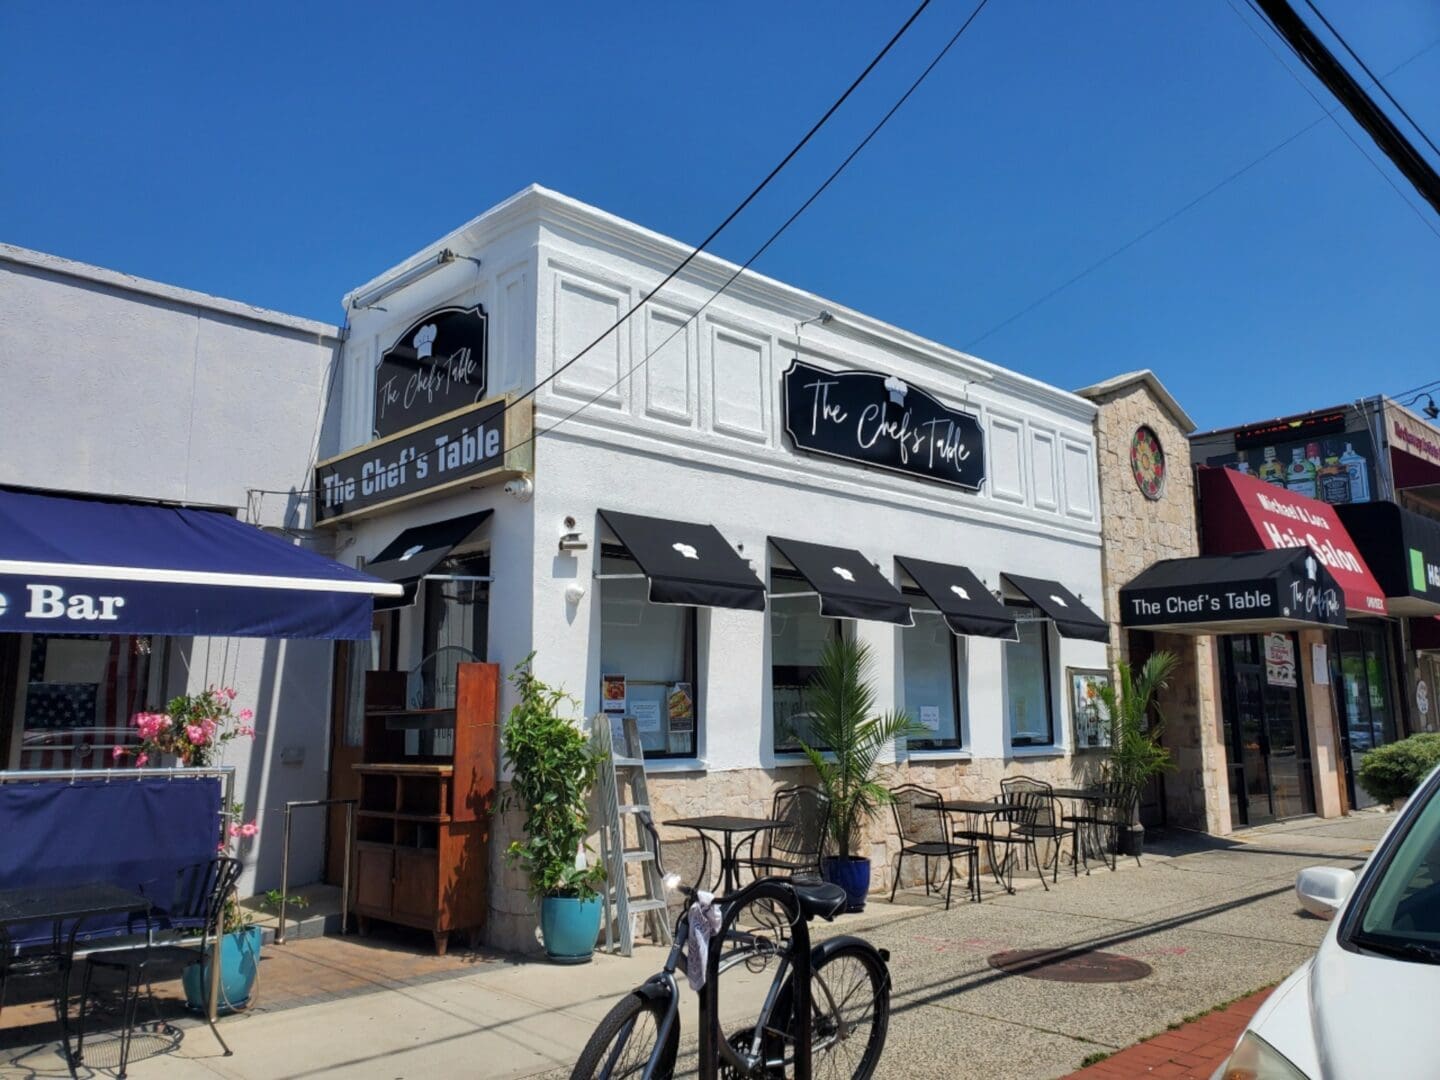 Exterior of the chef's table restaurant on a sunny day, featuring outdoor seating under blue umbrellas and parked bicycles near the ADP USA Solutions Gallery.